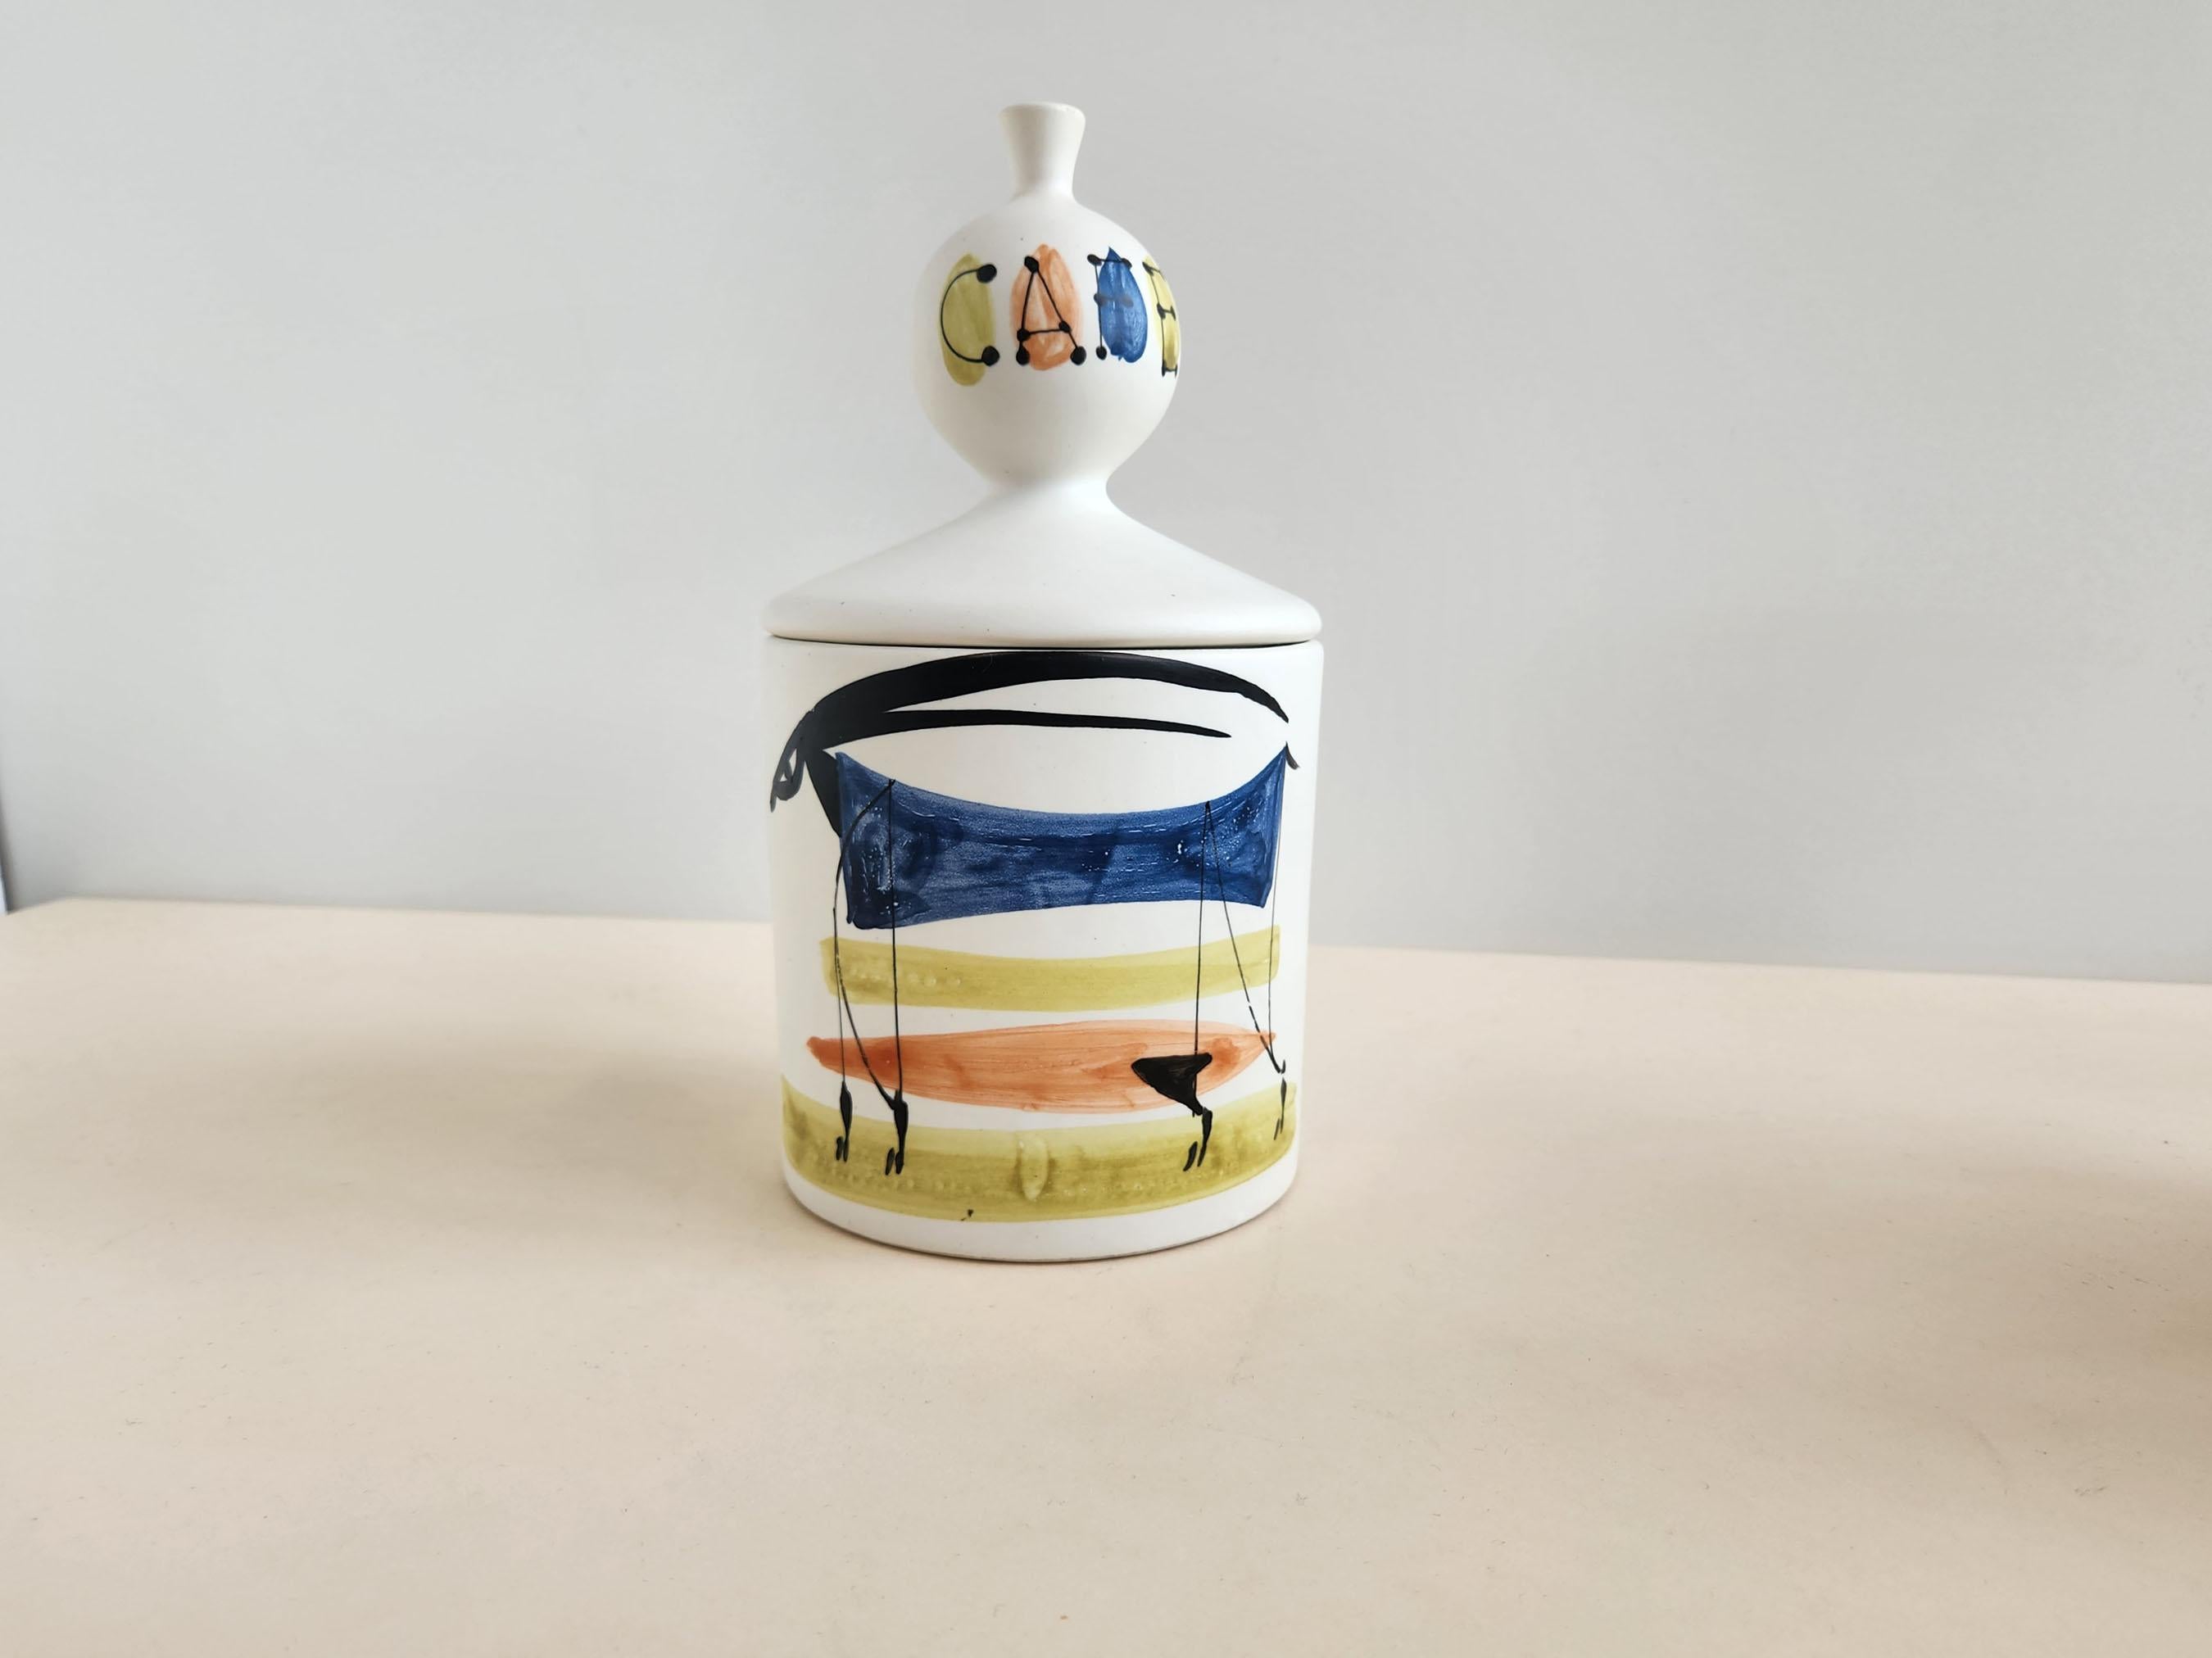 Vintage Ceramic Coffee Jar with Lid by Roger Capron - Vallauris, France

Roger Capron was in influential French ceramicist, known for his tiled tables and his use of recurring motifs such as stylized branches and geometrical suns.   He was born in